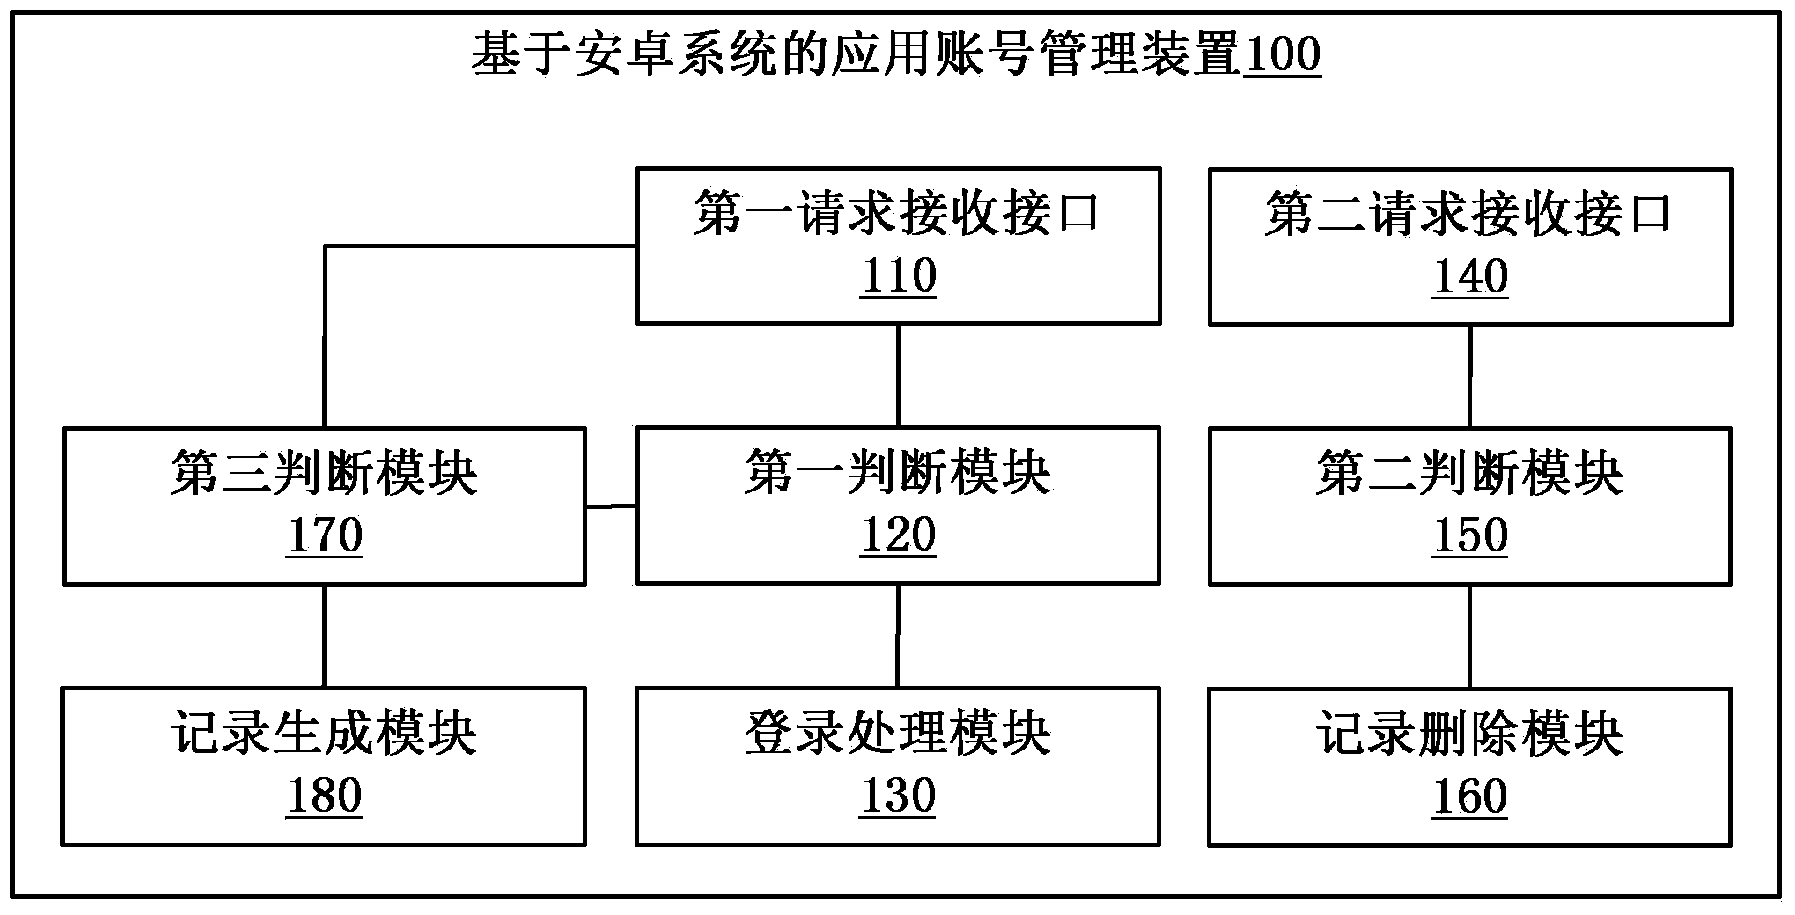 Application account management method and device based on android system